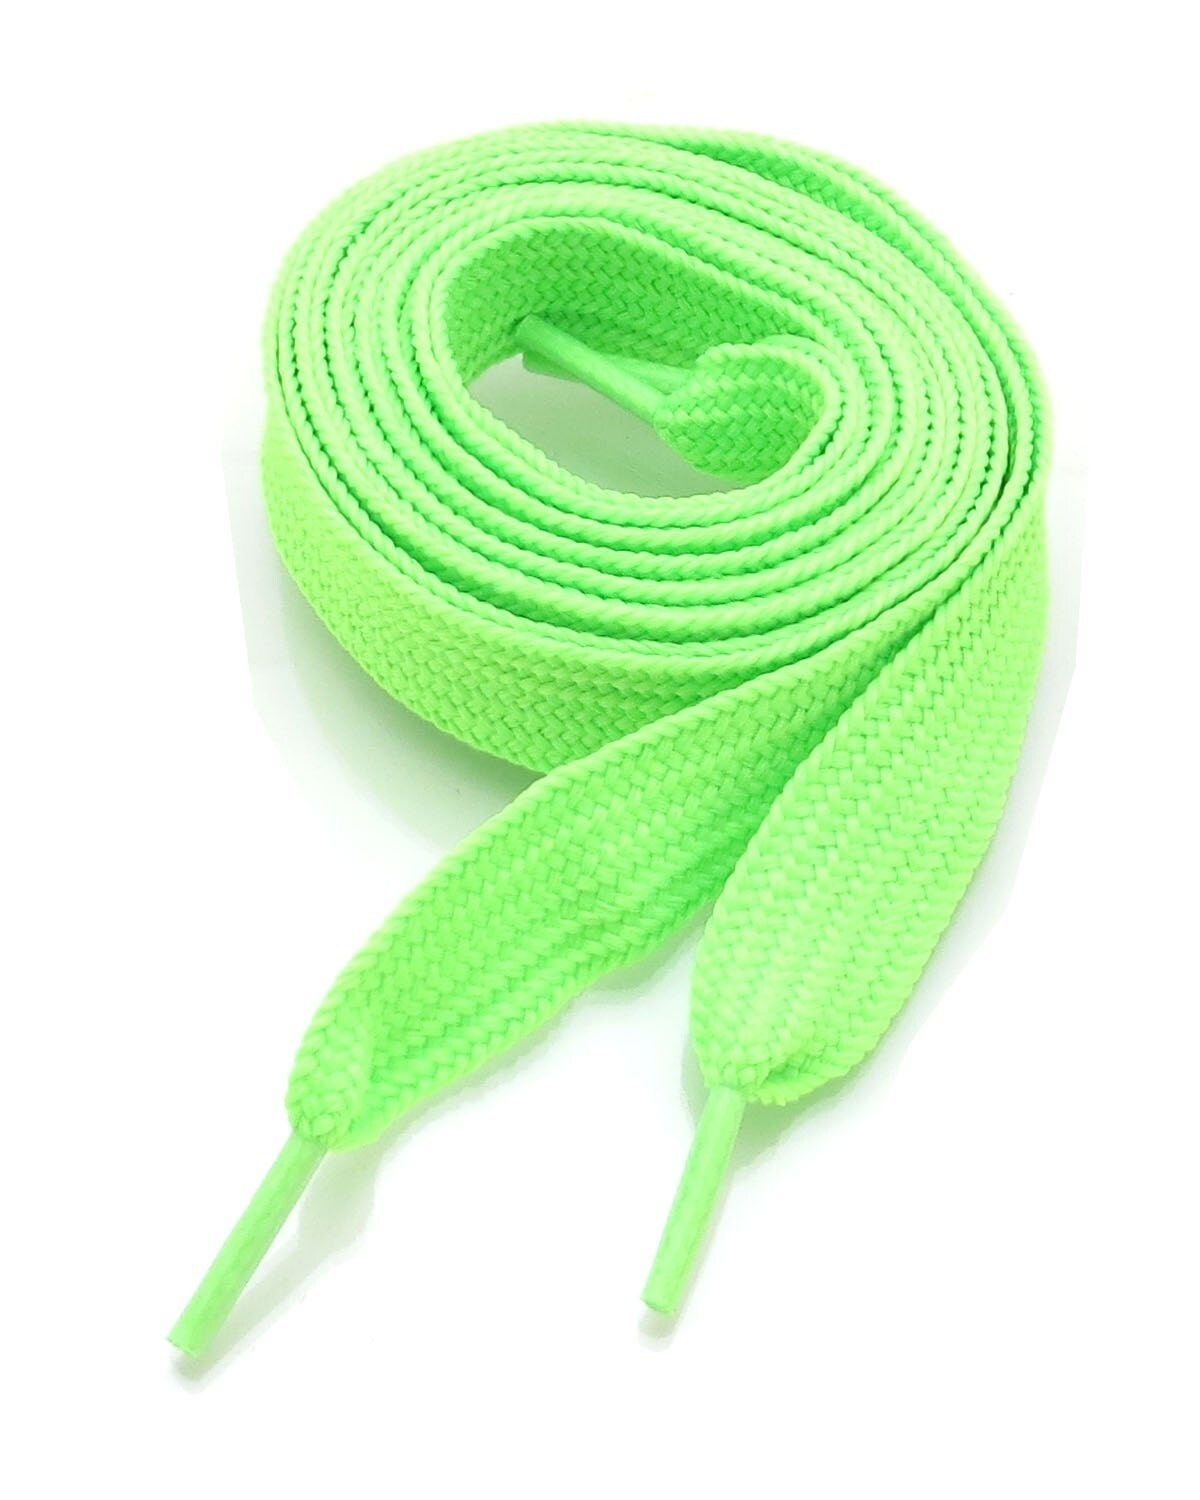 Thick Fat Shoelaces for Sneakers Boots and Shoes Chose by